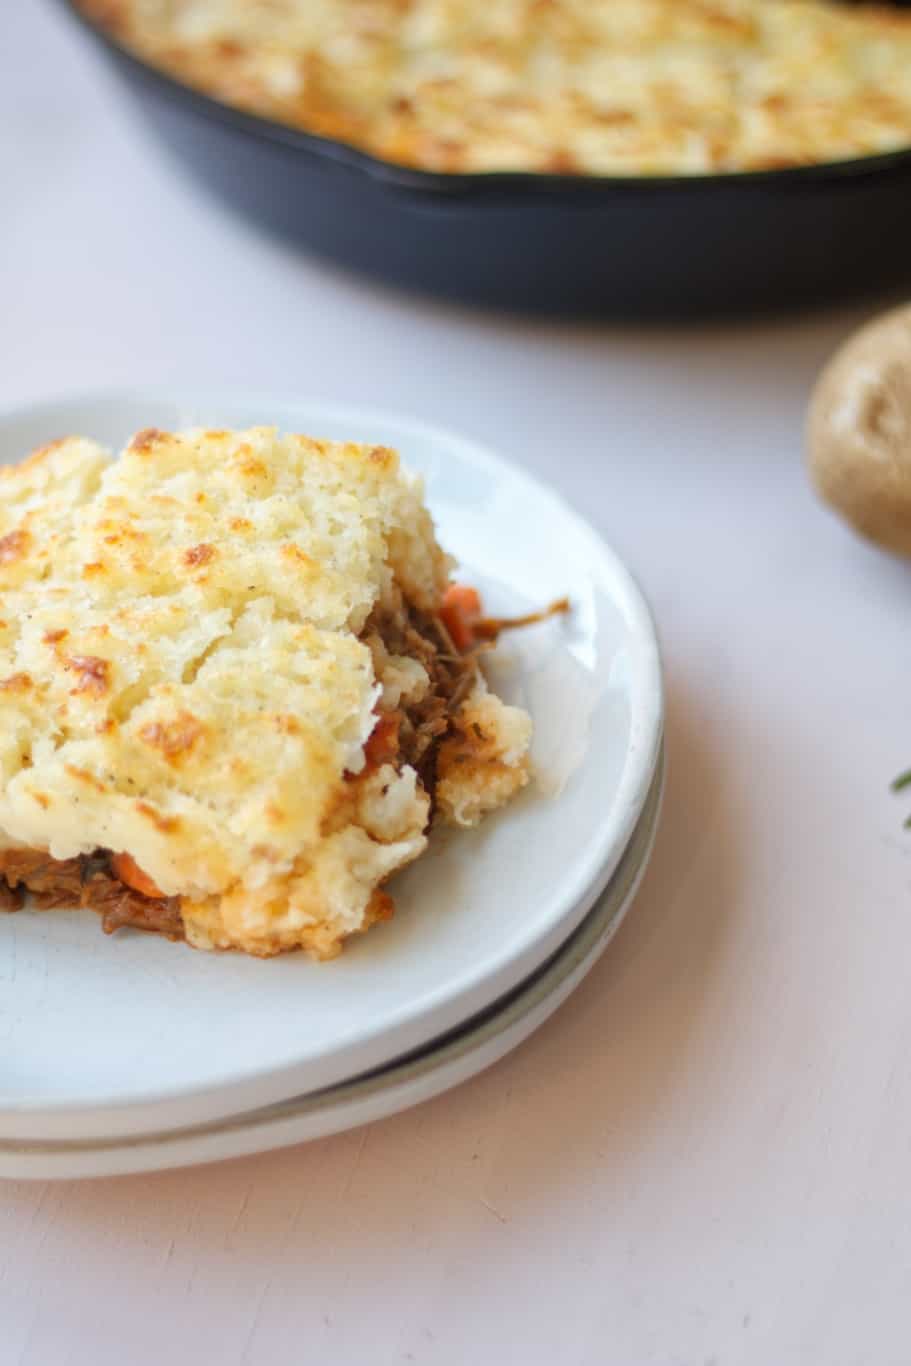 Shepherd's pie piece made with leftover lamb leg, some veggies, and mashed potatoes